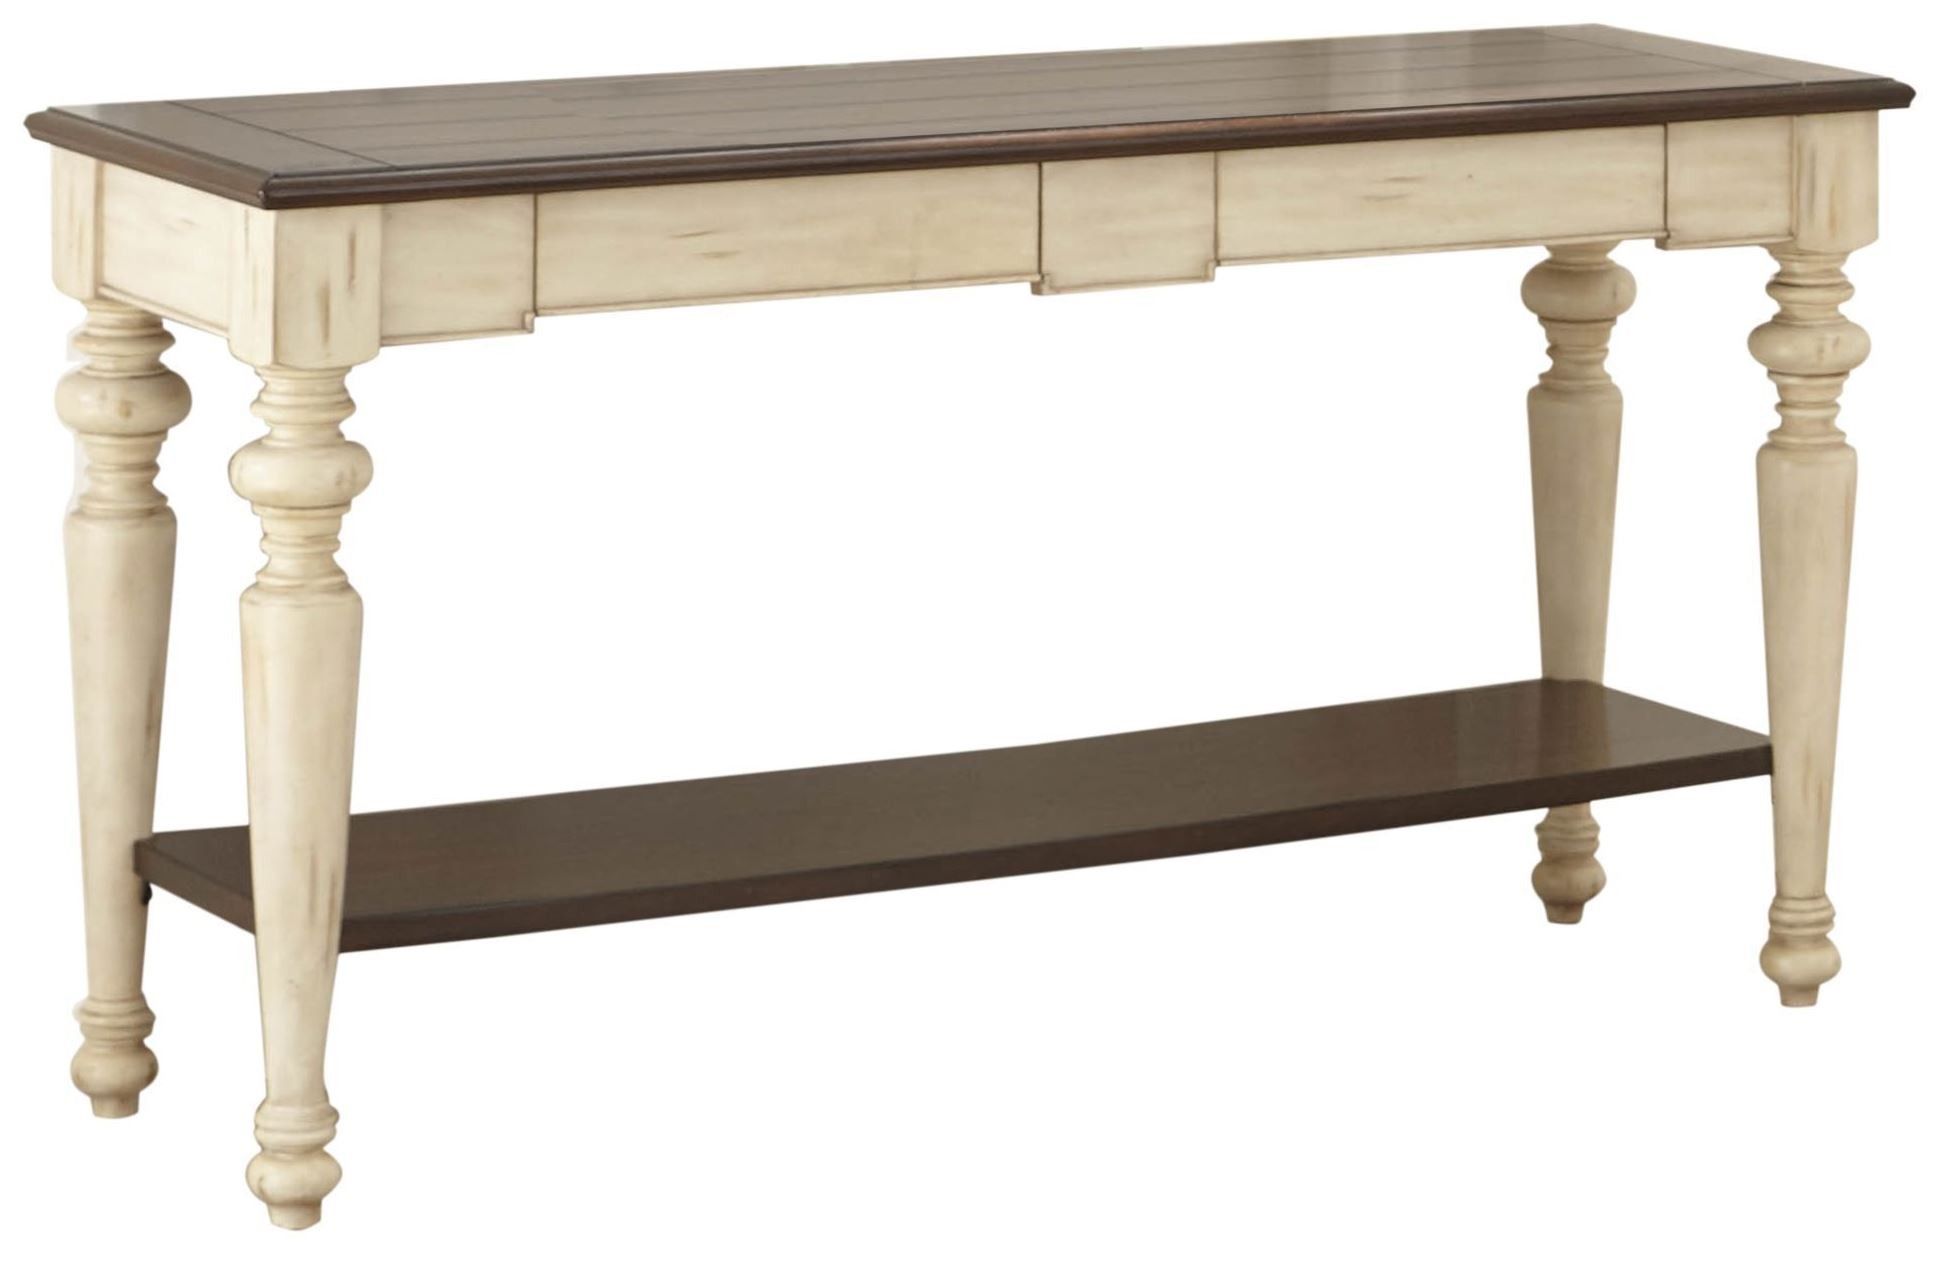 Wesley Antique White And Walnut Sofa Table, Wy300s, Steve Silver Inside Hand Finished Walnut Console Tables (Gallery 20 of 20)